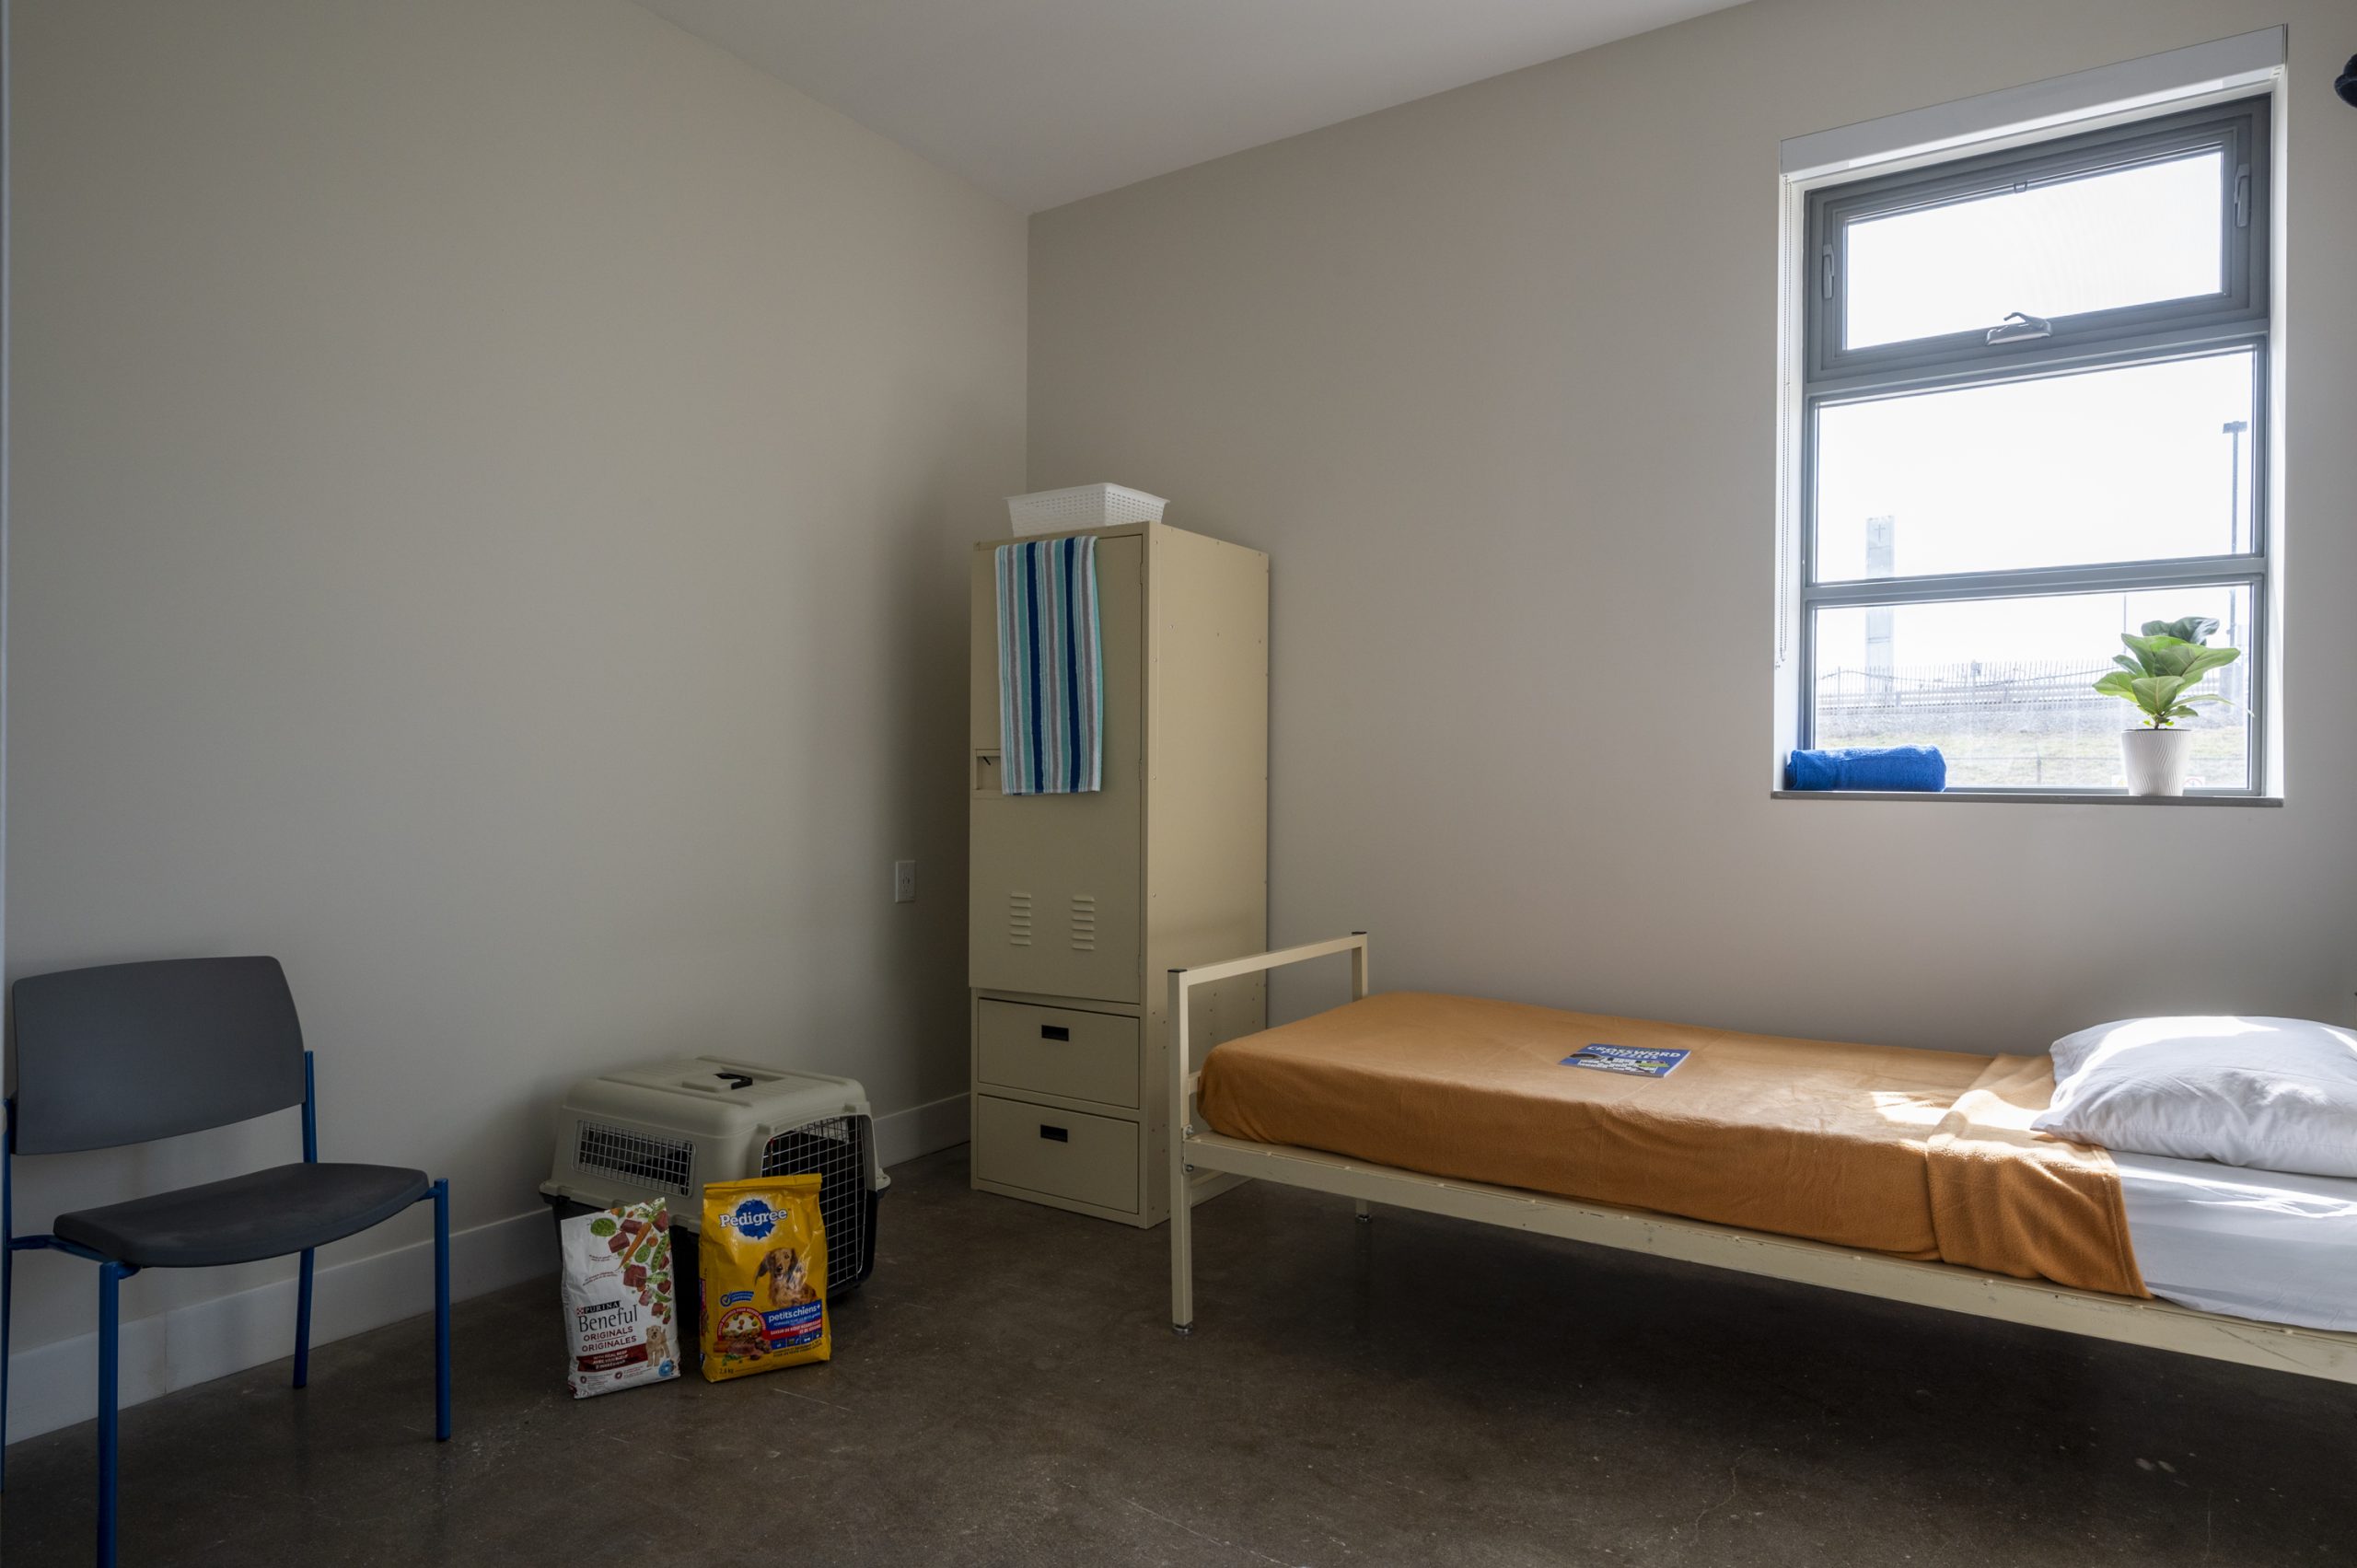 Single bed with orange bedcovers, a locker and pet supplies in a room with a bright window